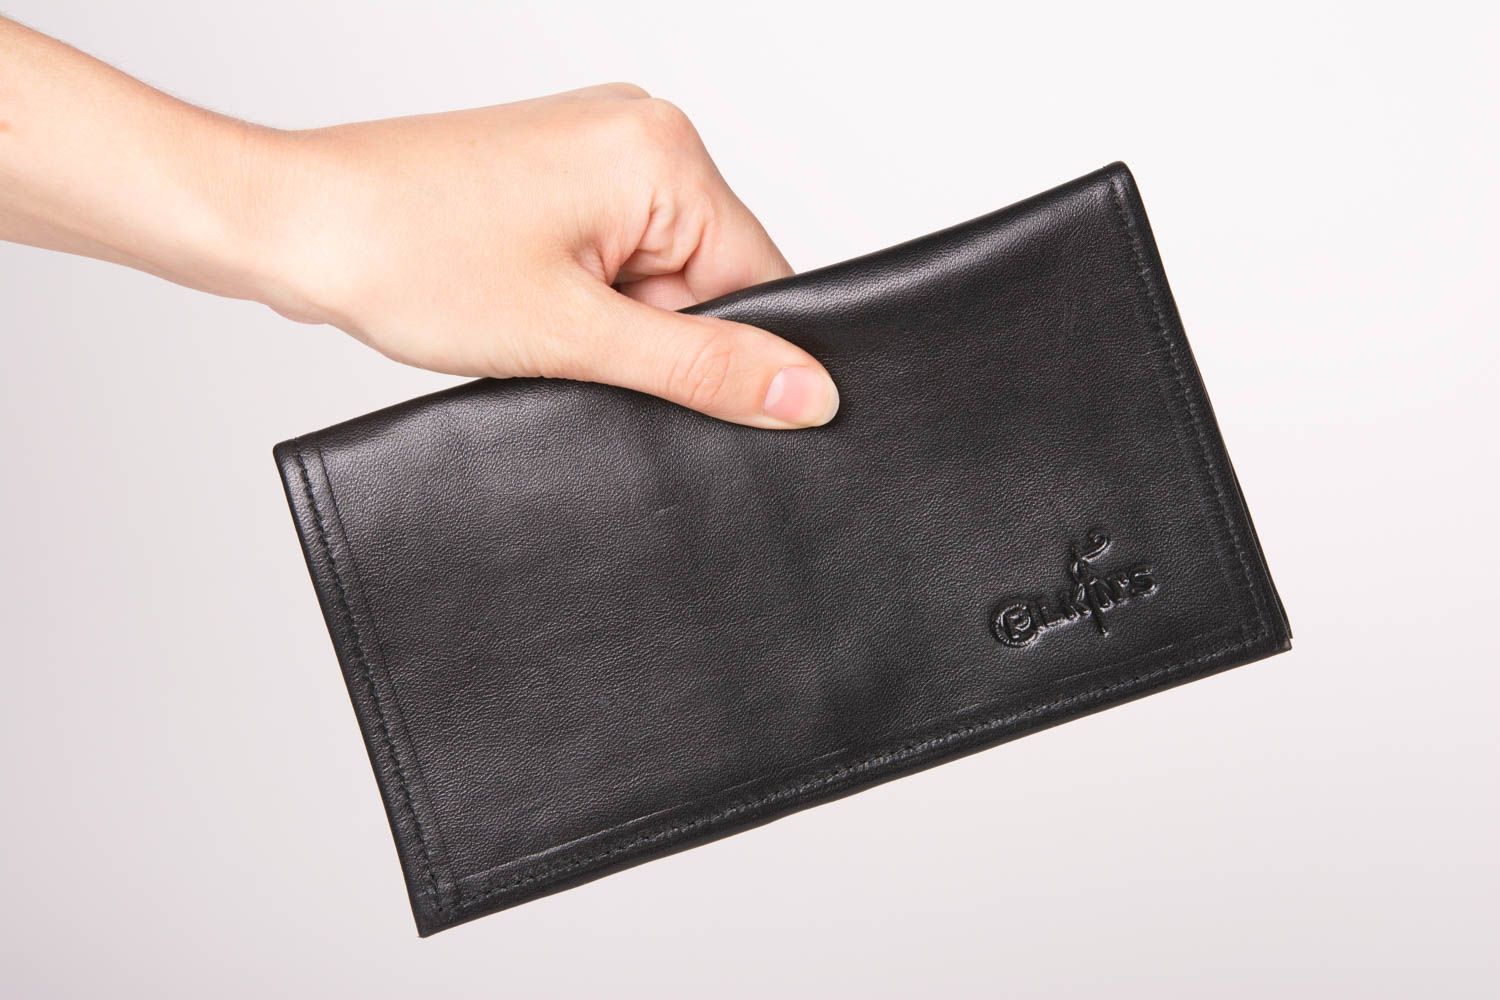 Big stylish handmade black wallet made of natural leather with snap-fastener photo 5